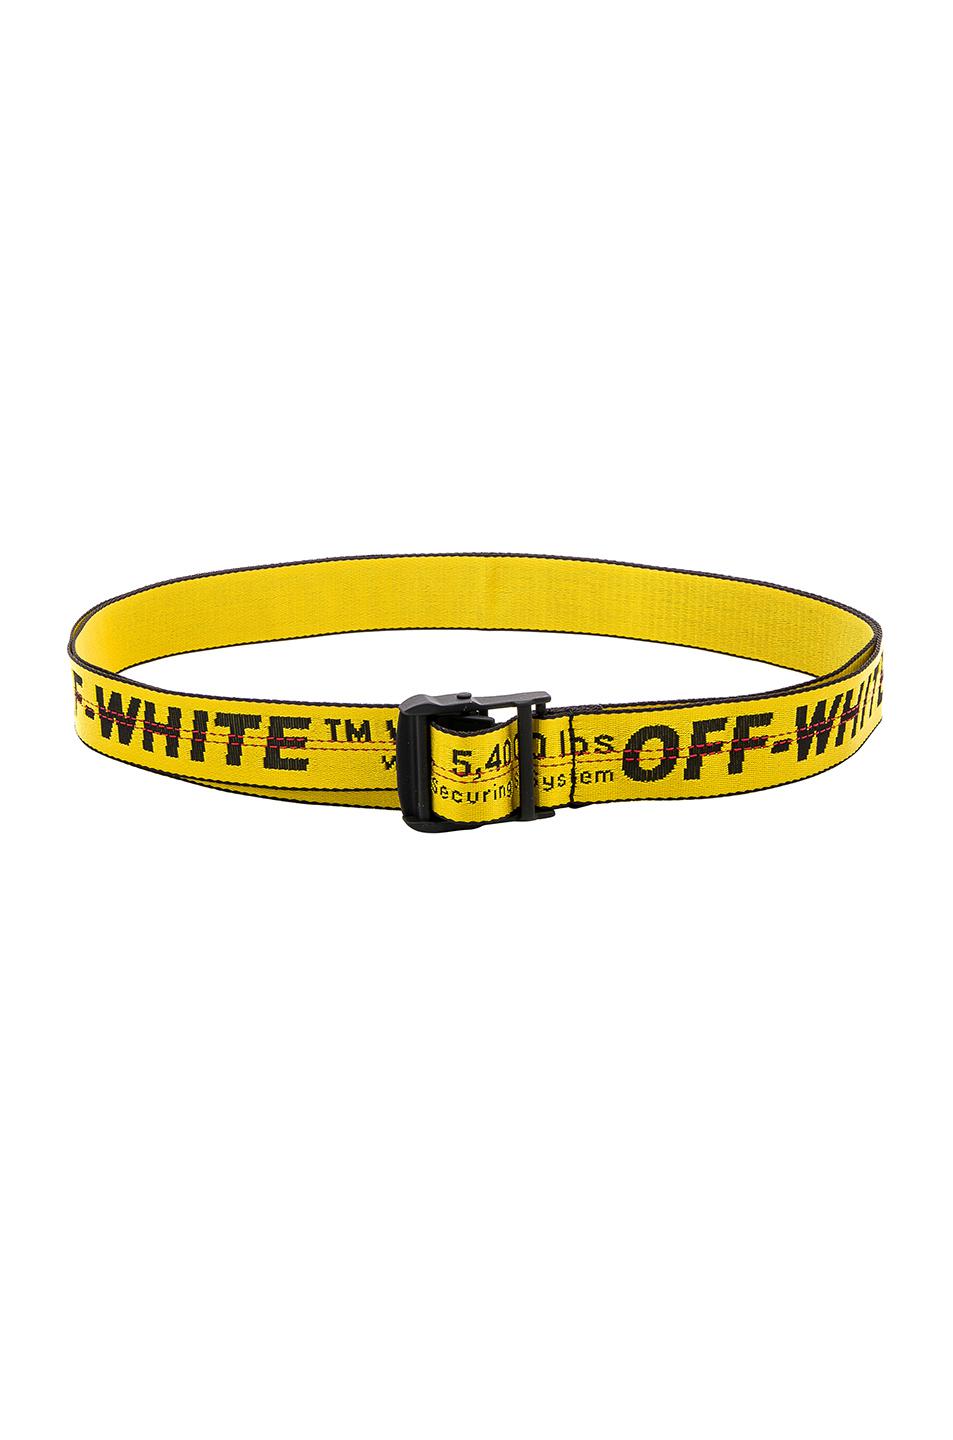 Off-White c/o Virgil Abloh Classic Industrial Belt in Yellow - Lyst